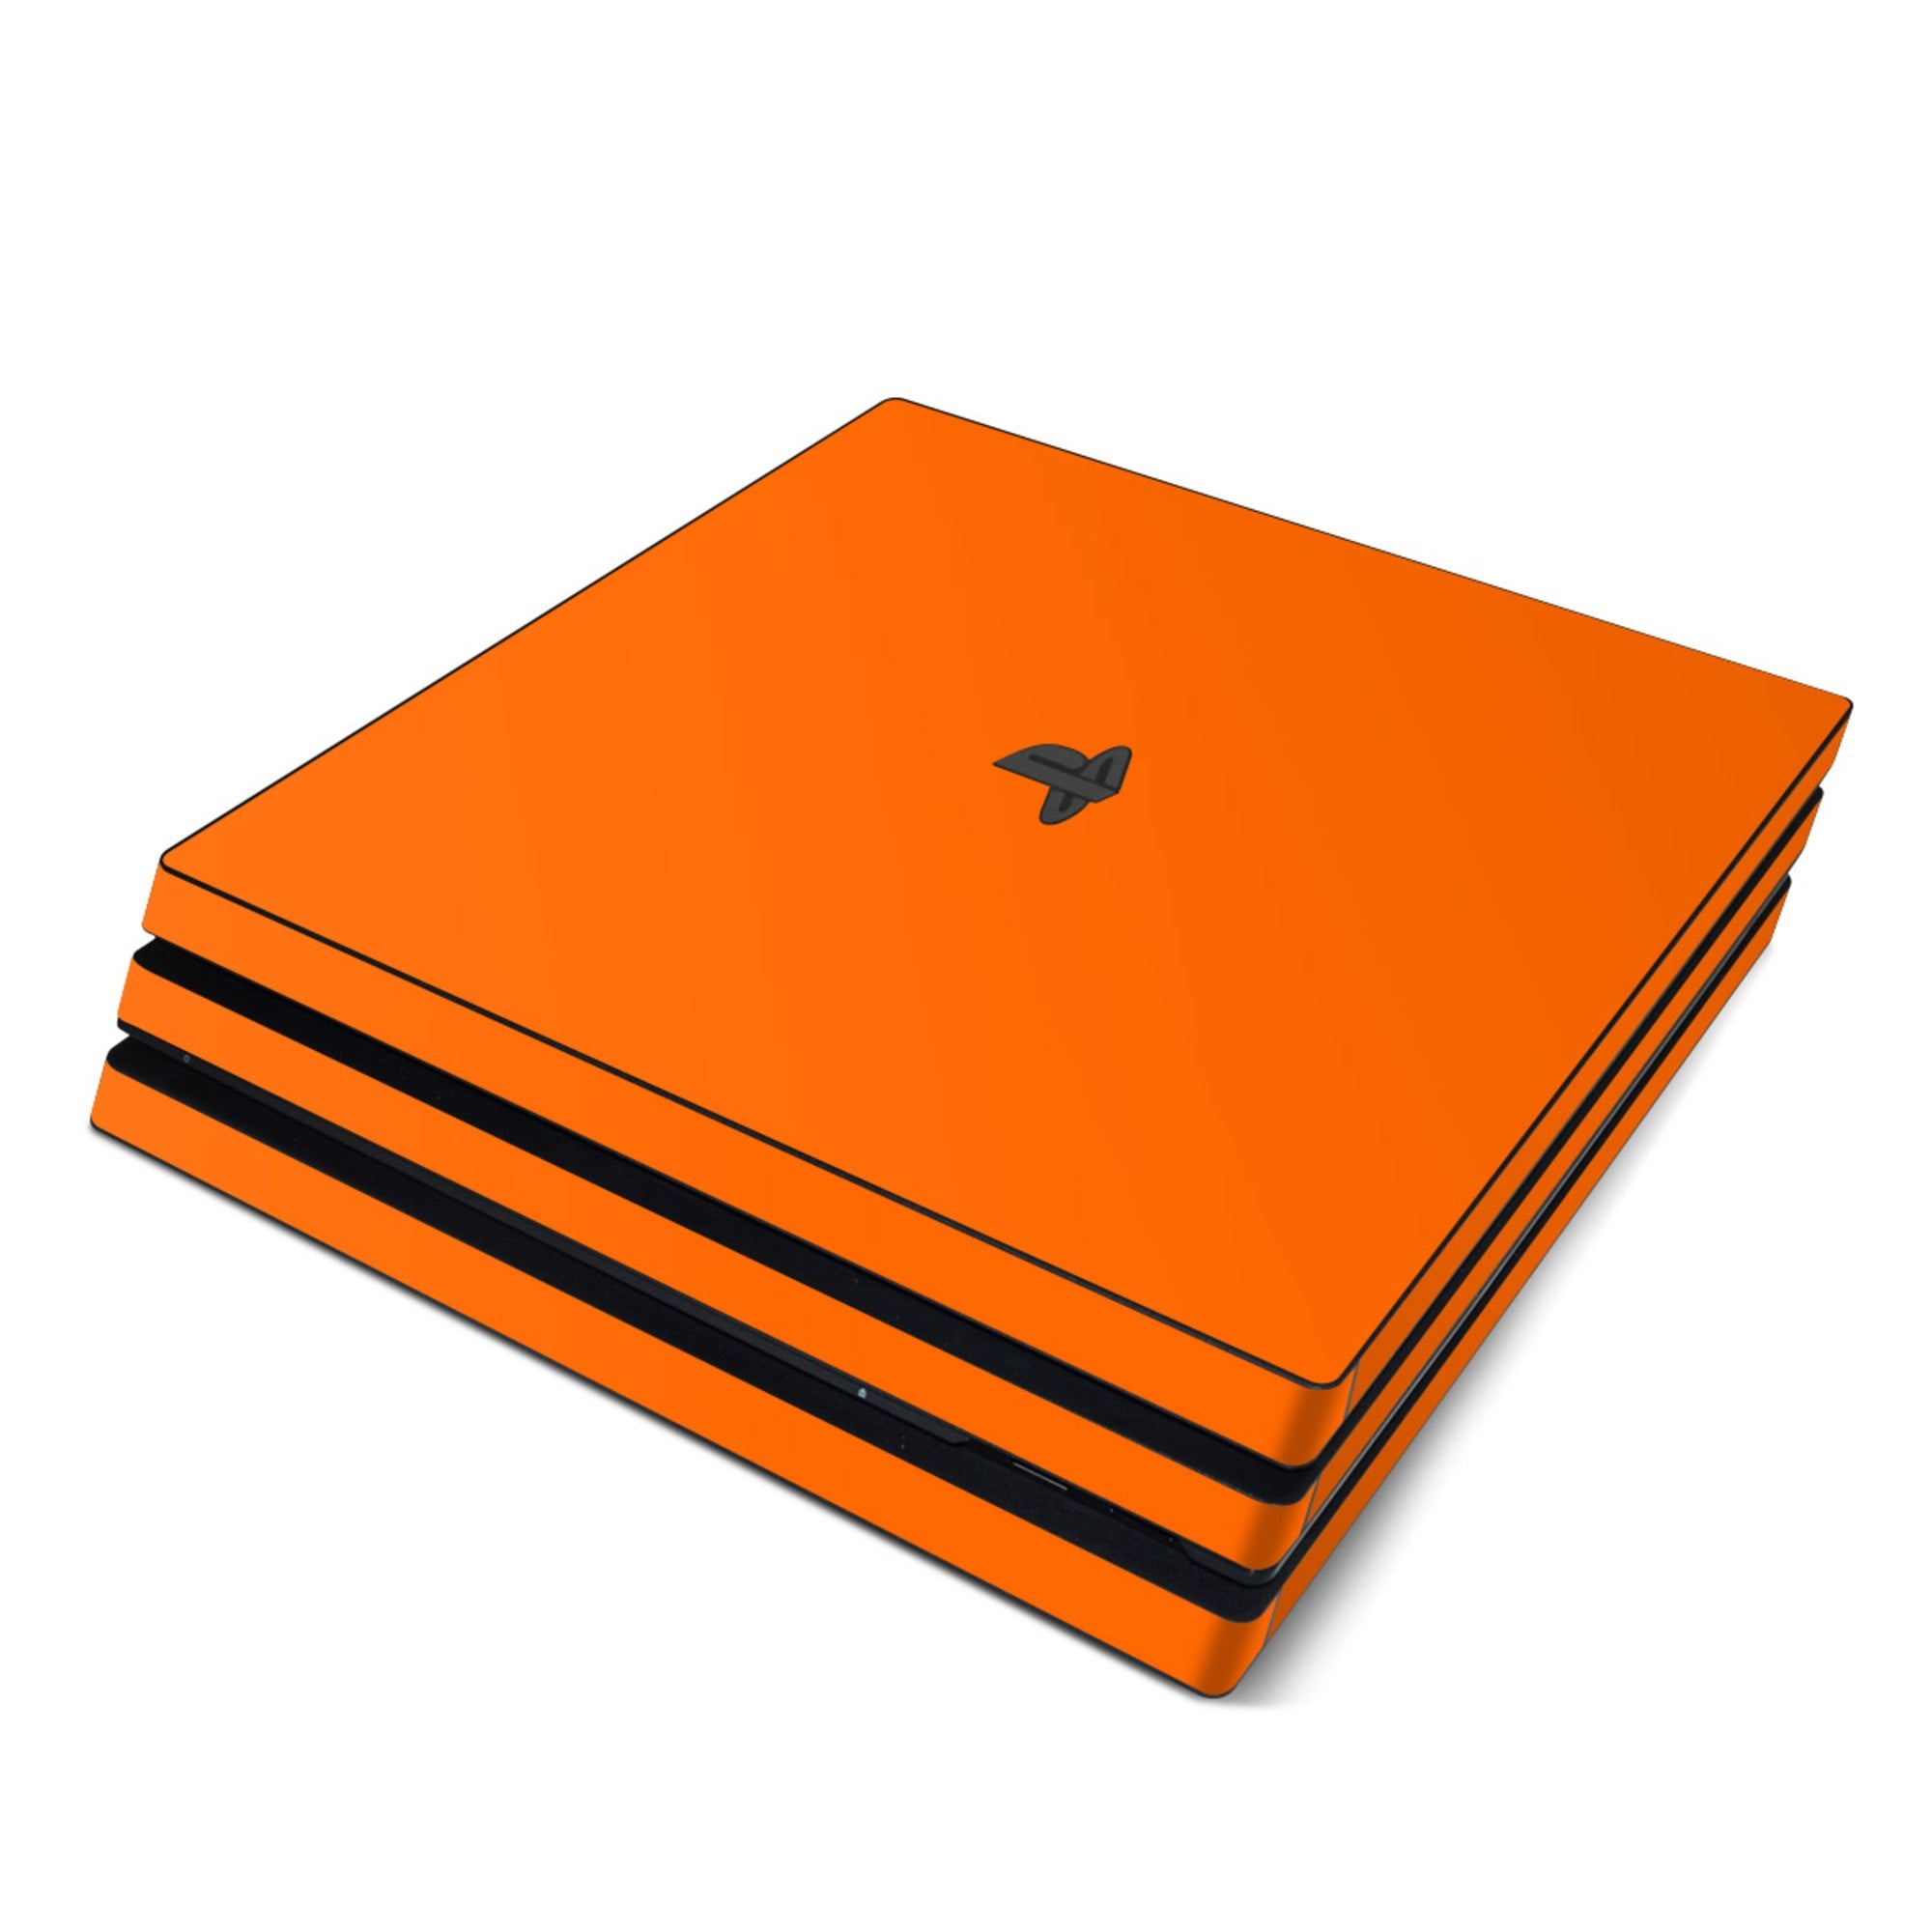 Solid State Pumpkin - Sony PS4 Pro Skin